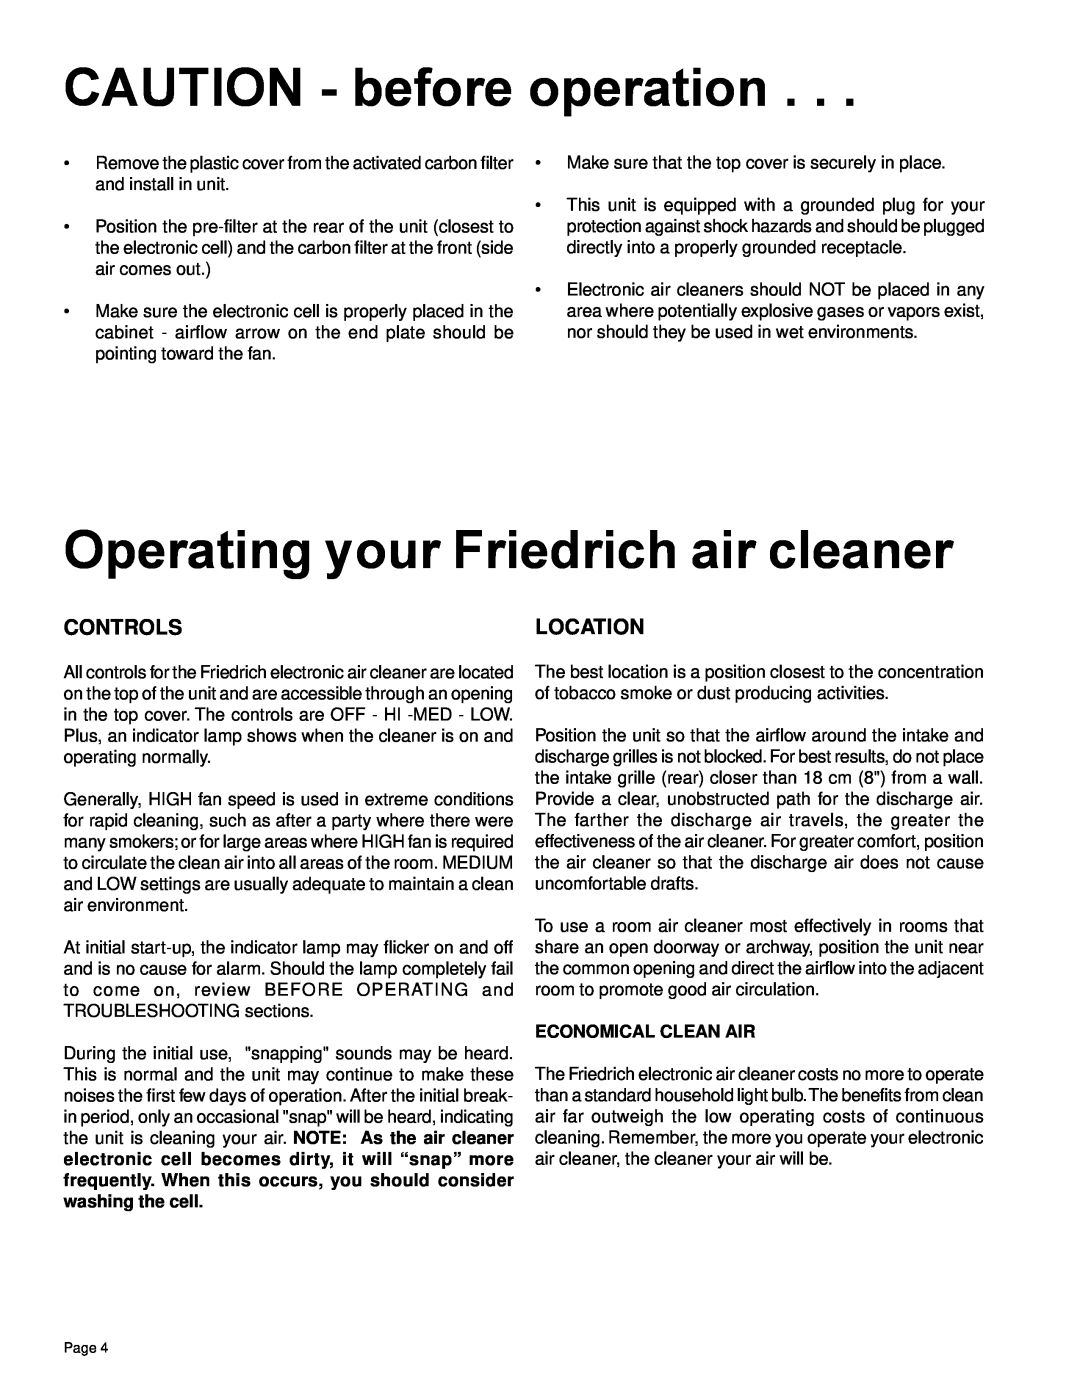 Friedrich C-90A CAUTION - before operation, Operating your Friedrich air cleaner, Controls, Location, Economical Clean Air 